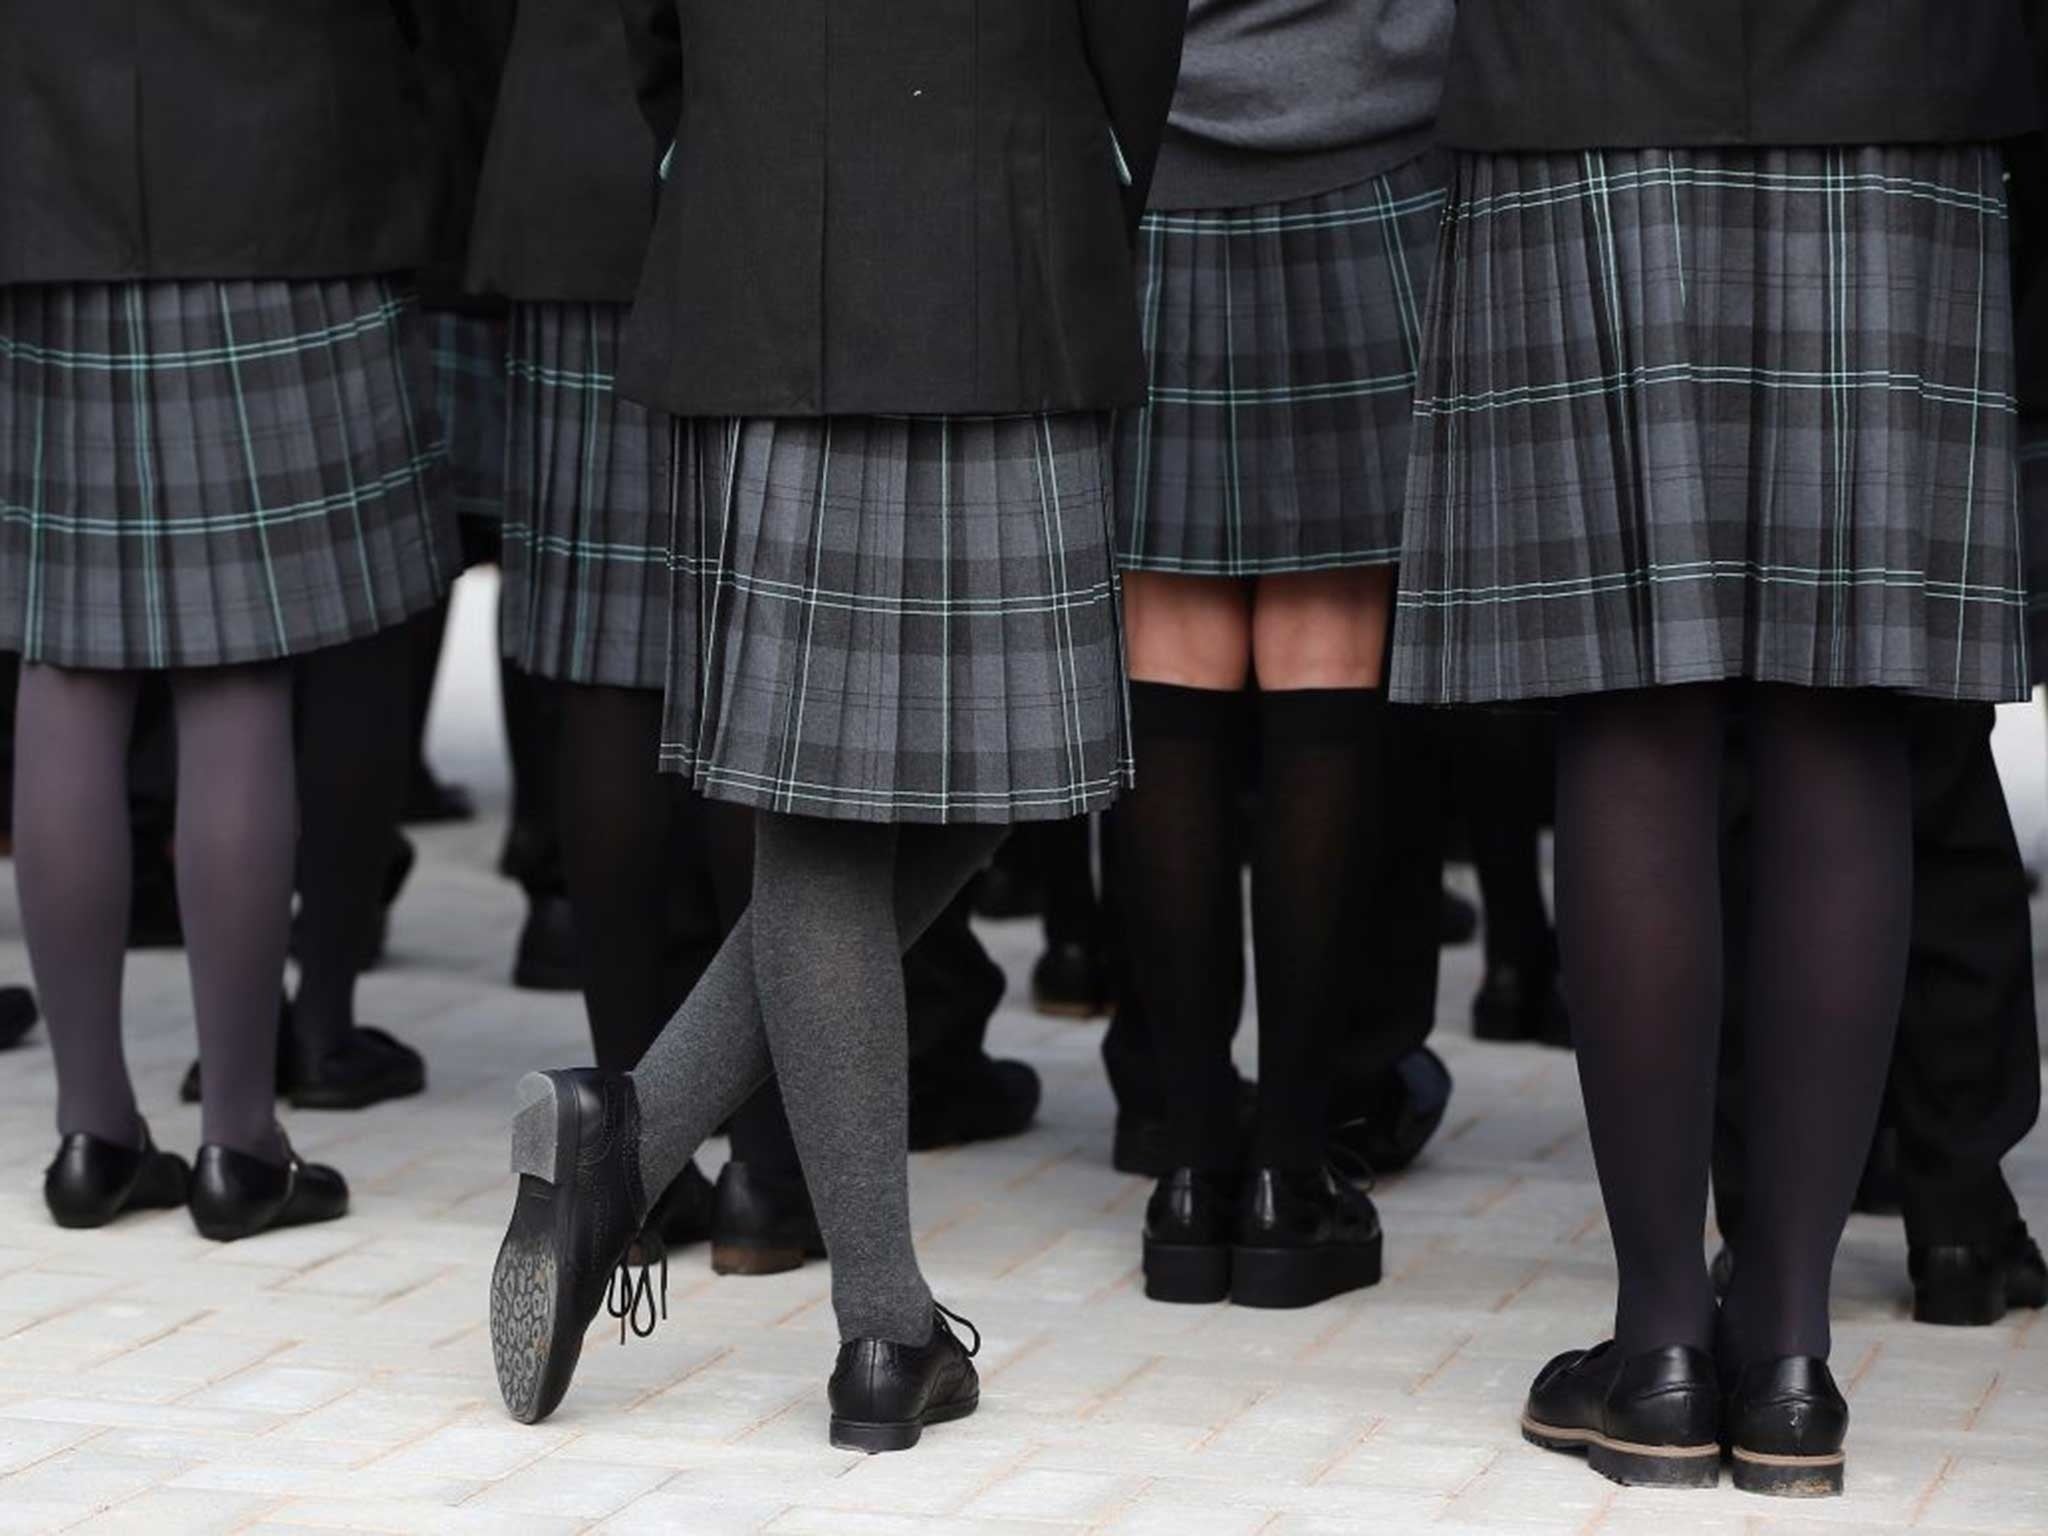 A study by Plan International UK, a leading charity, previously found one in three girls have been harassed in their school uniforms